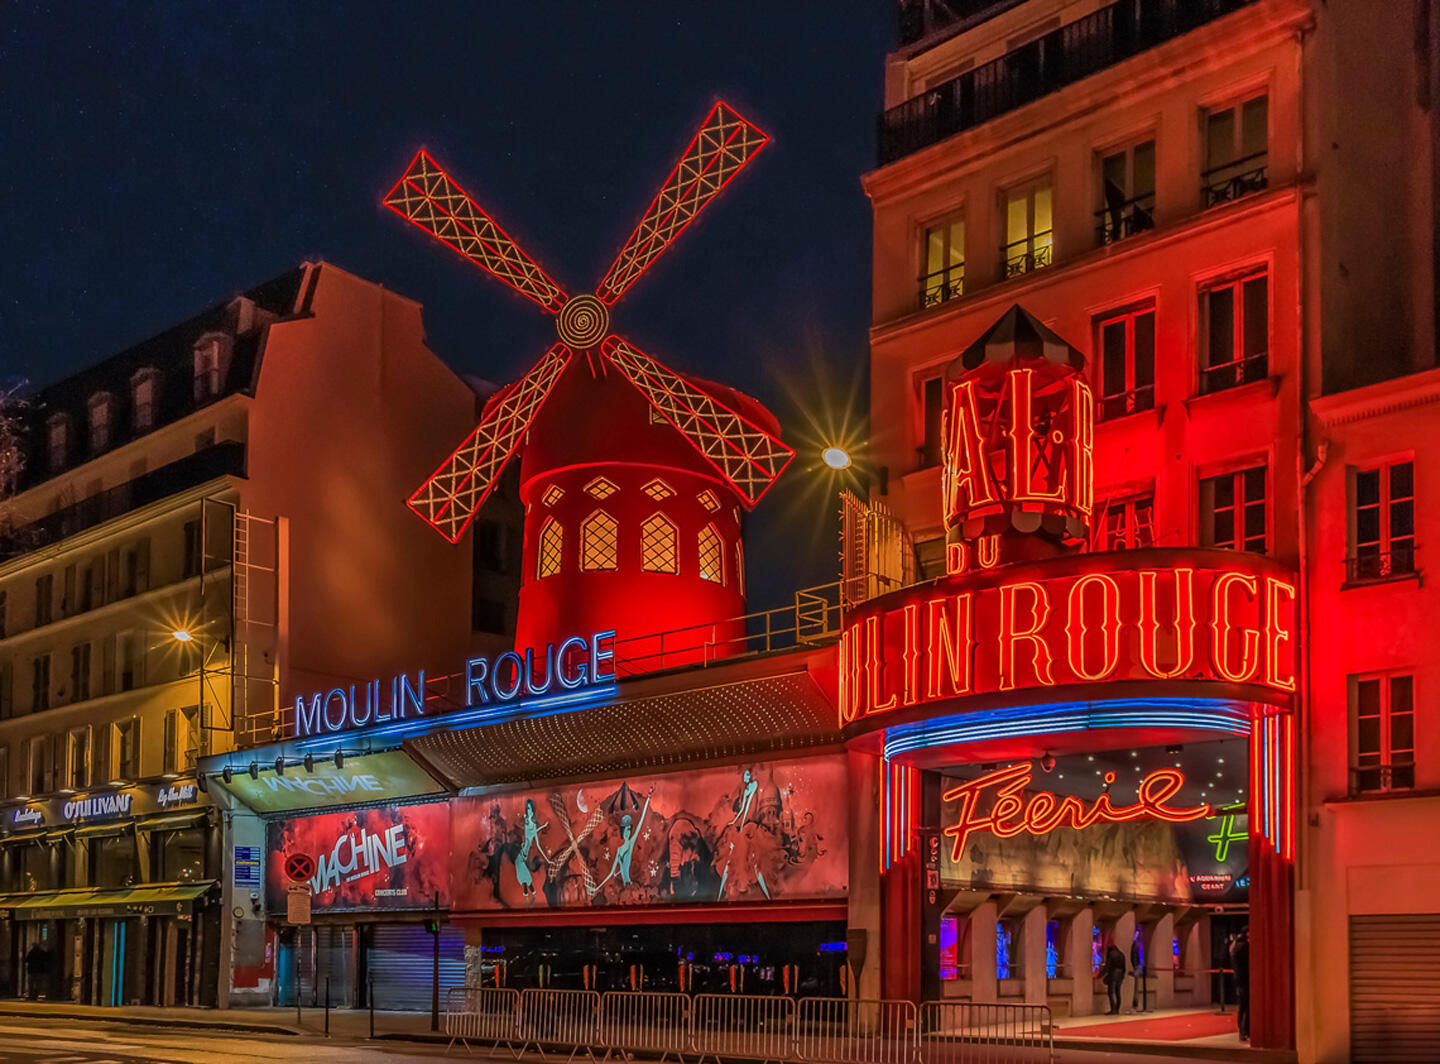 Illuminated facade of the Moulin Rouge in Paris at night with its iconic red windmill.